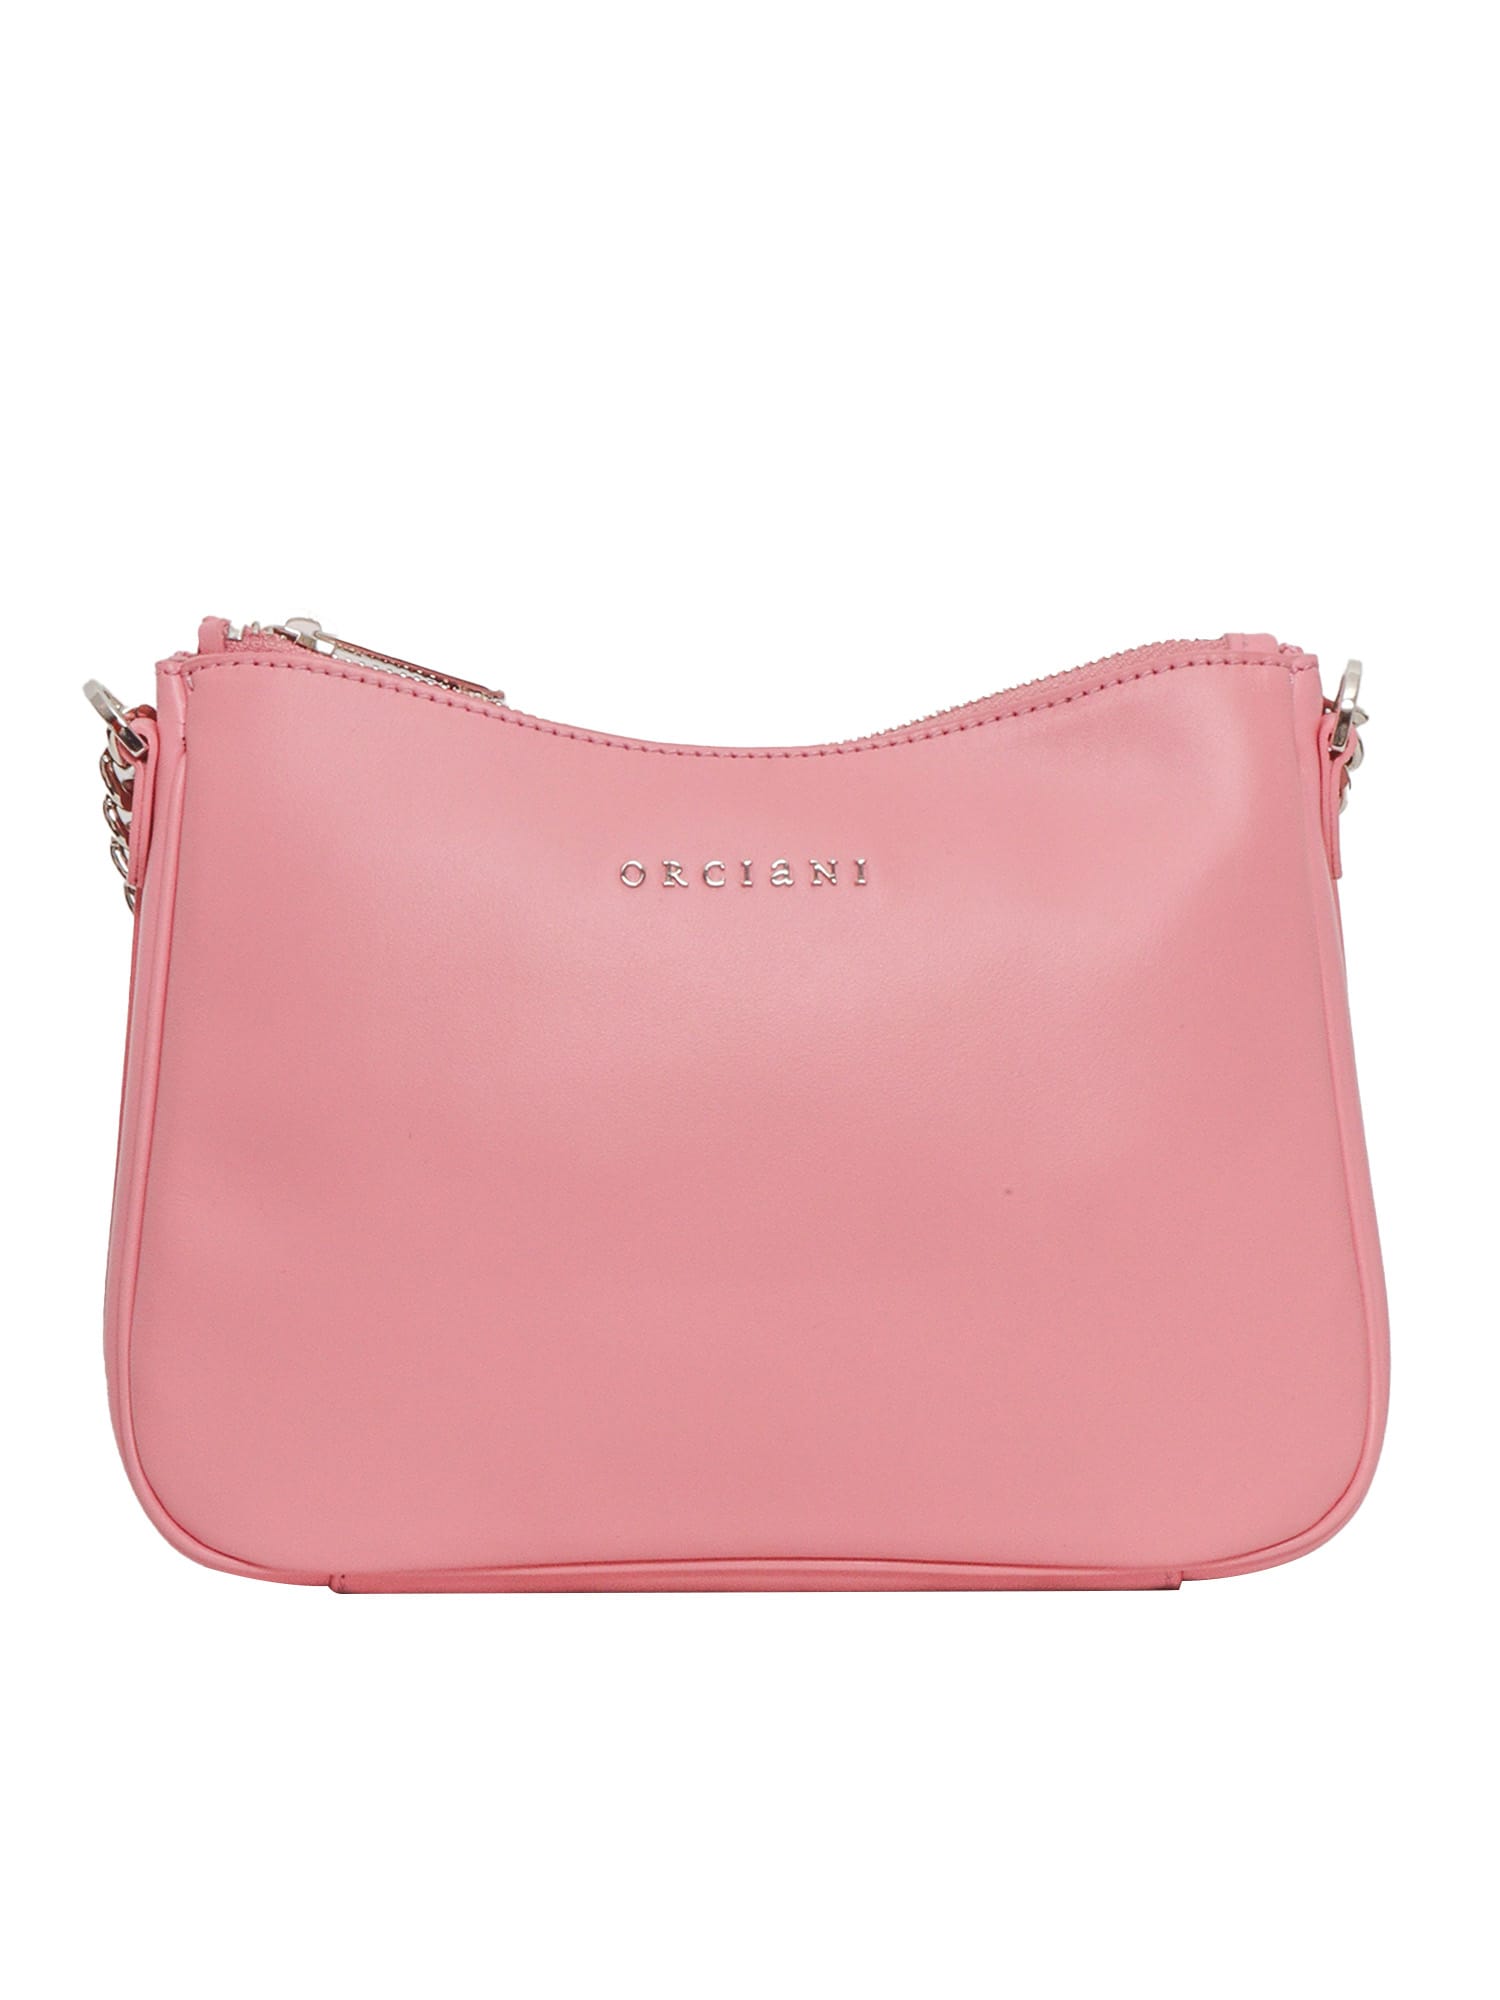 Orciani Pink Clutch Bag